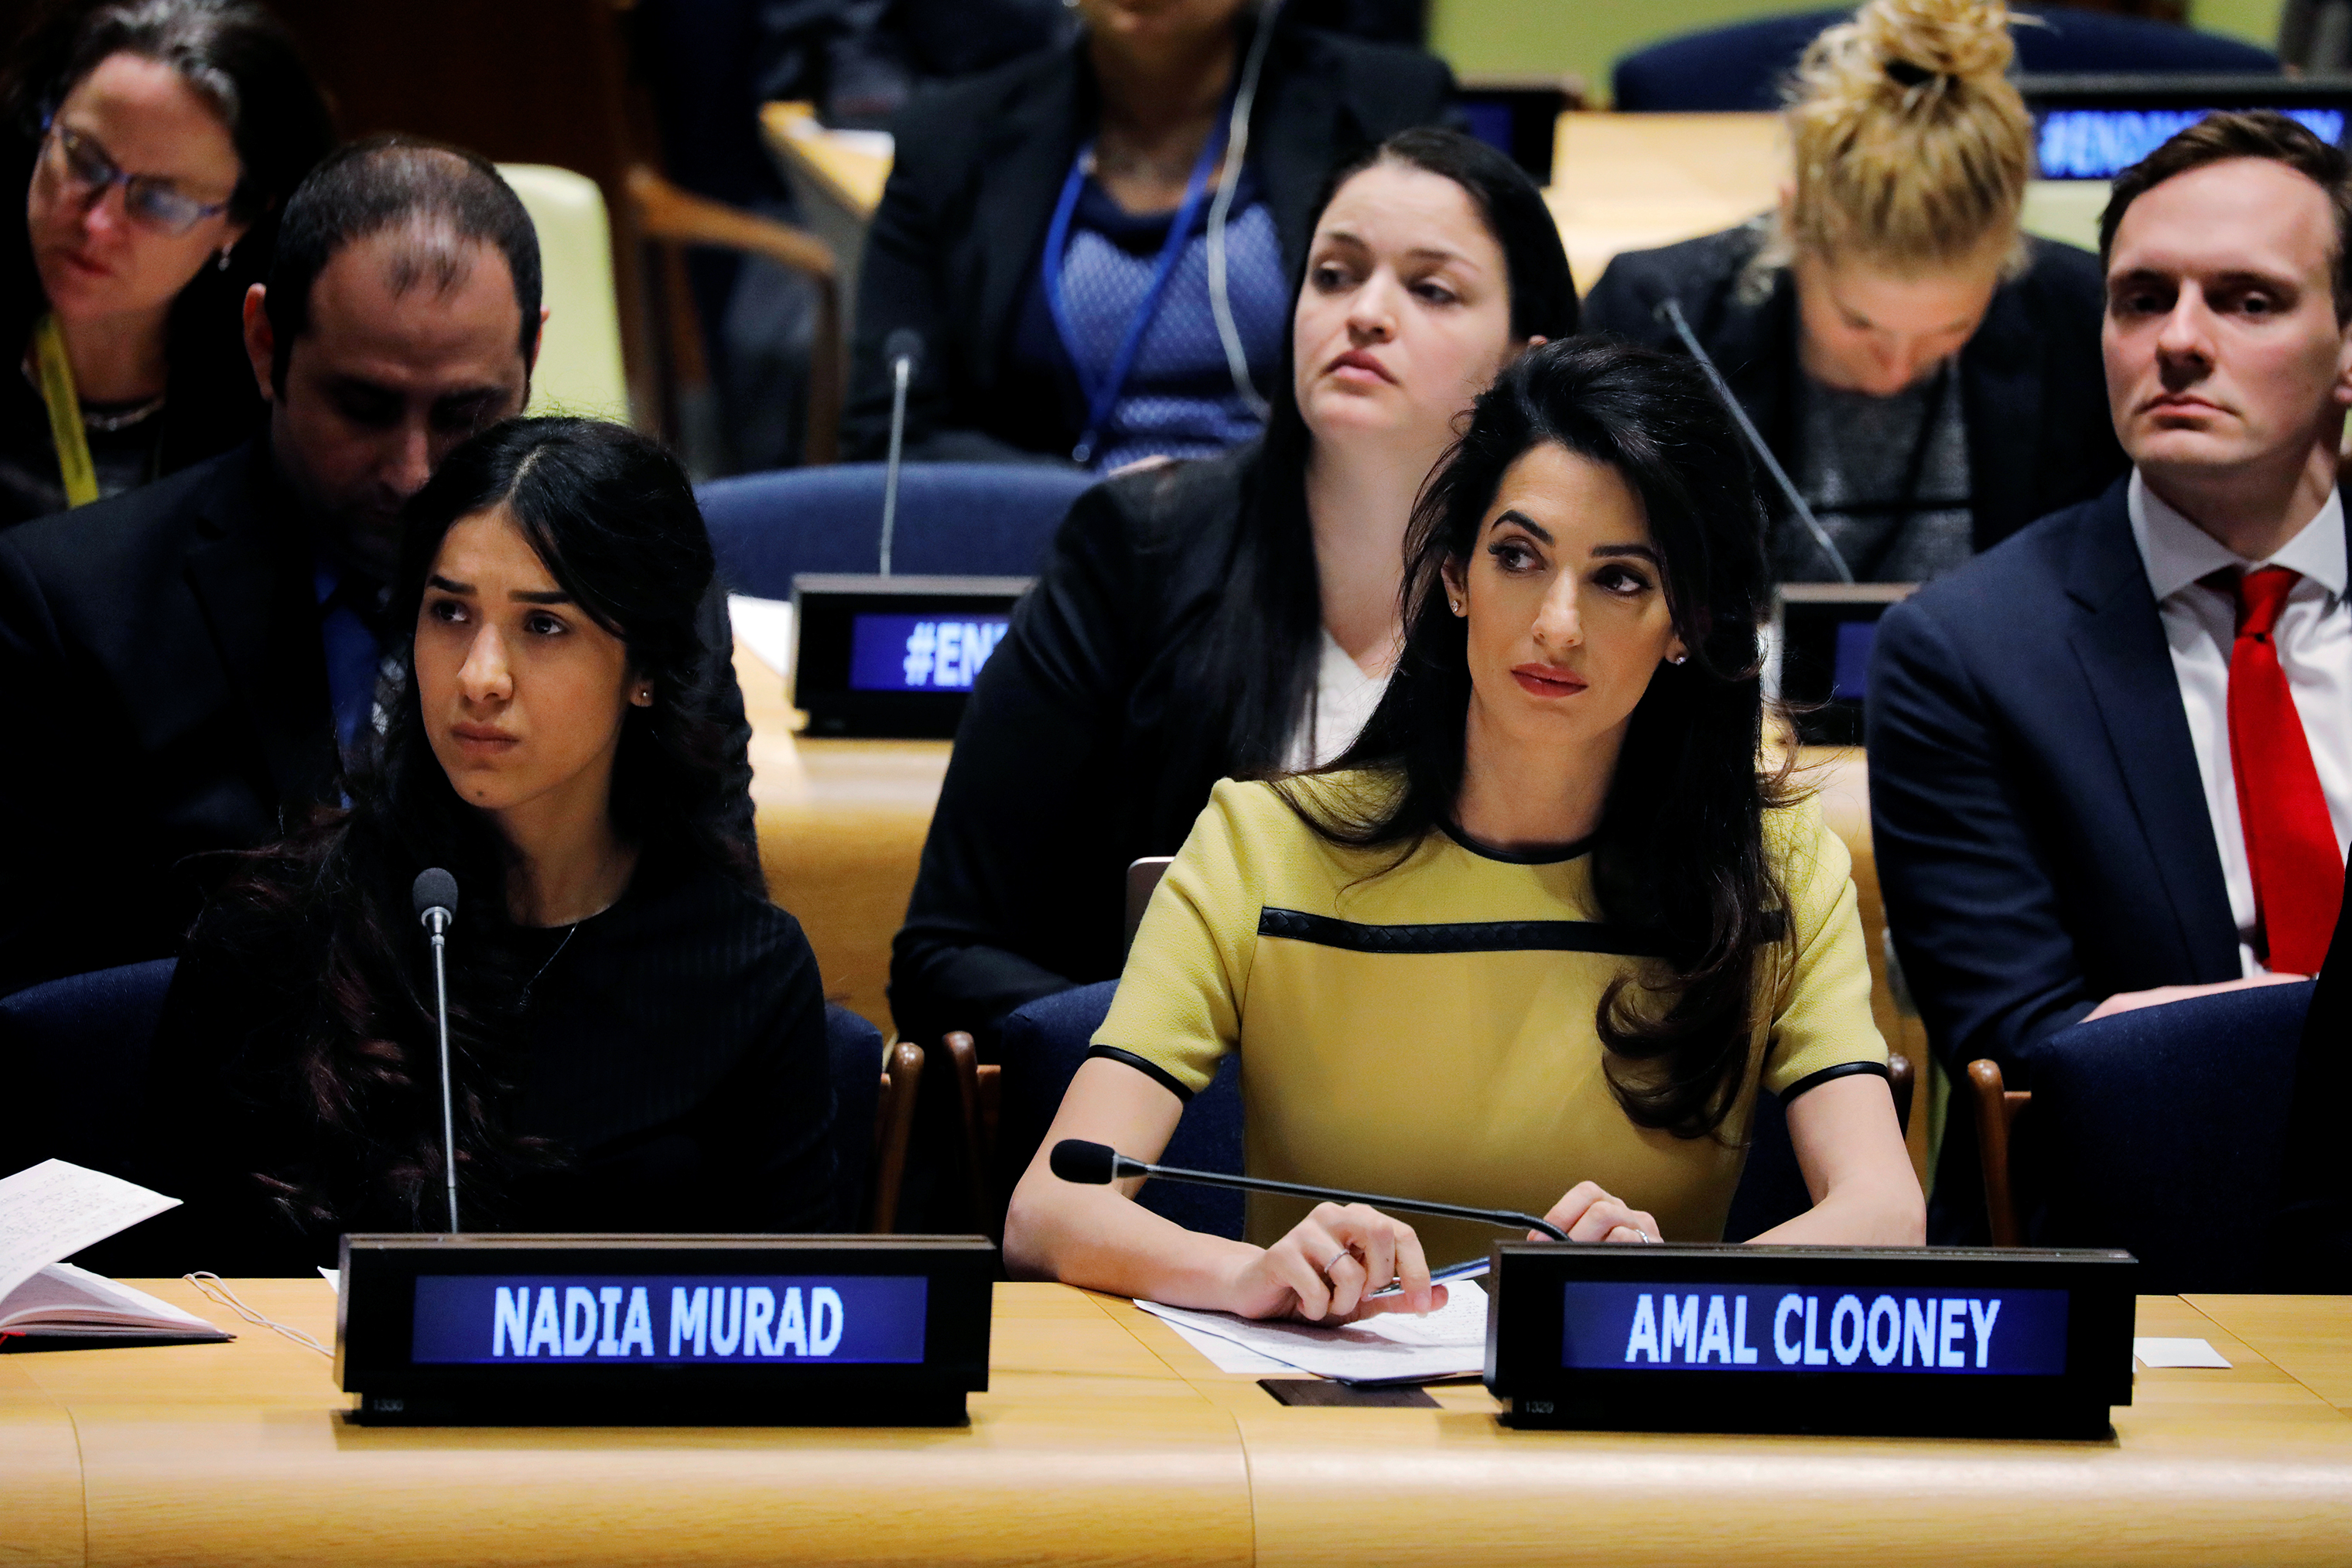 International human rights lawyer Amal Clooney sits with Murad as she waits to address a 